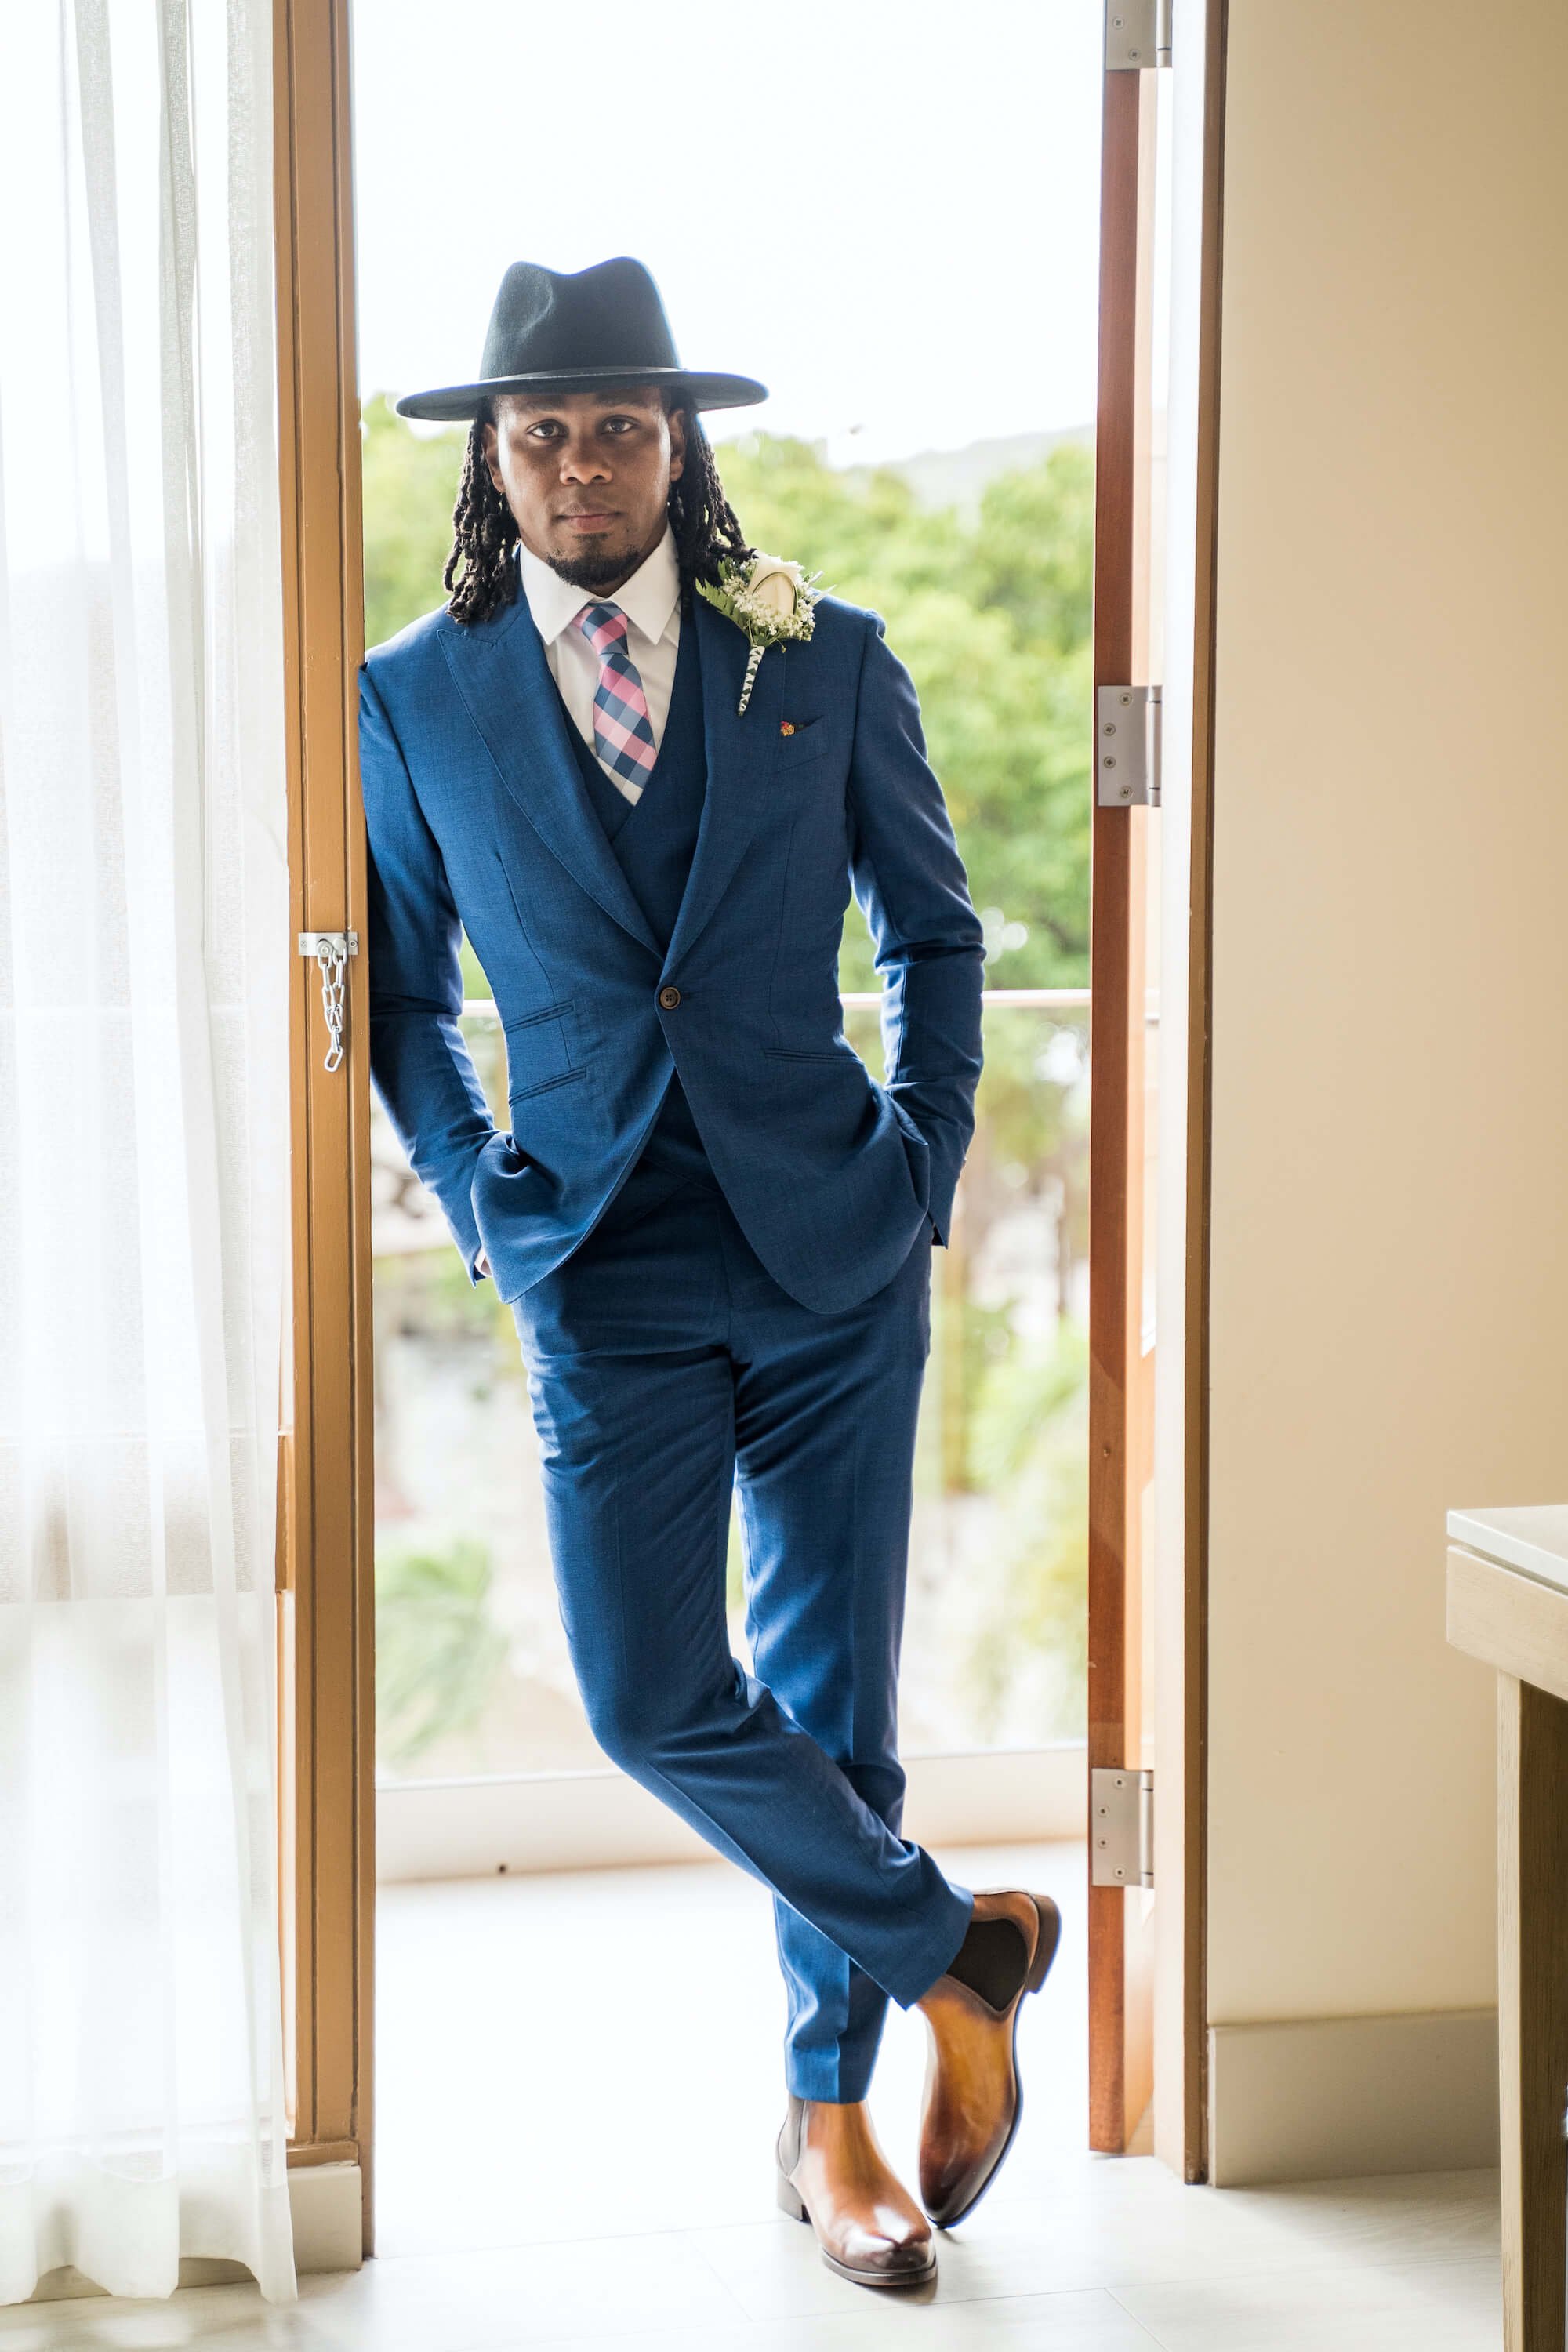 brittany-how-to-plan-a-destination-wedding-in-willemstad-curacao-dreams-curacao-resort-review-natural-hair-groom-locs-hat-blue-tuxedo-suit-black-destination-bride-desti-tv-desti-guide-to-destination-weddings-1-2022.jpg